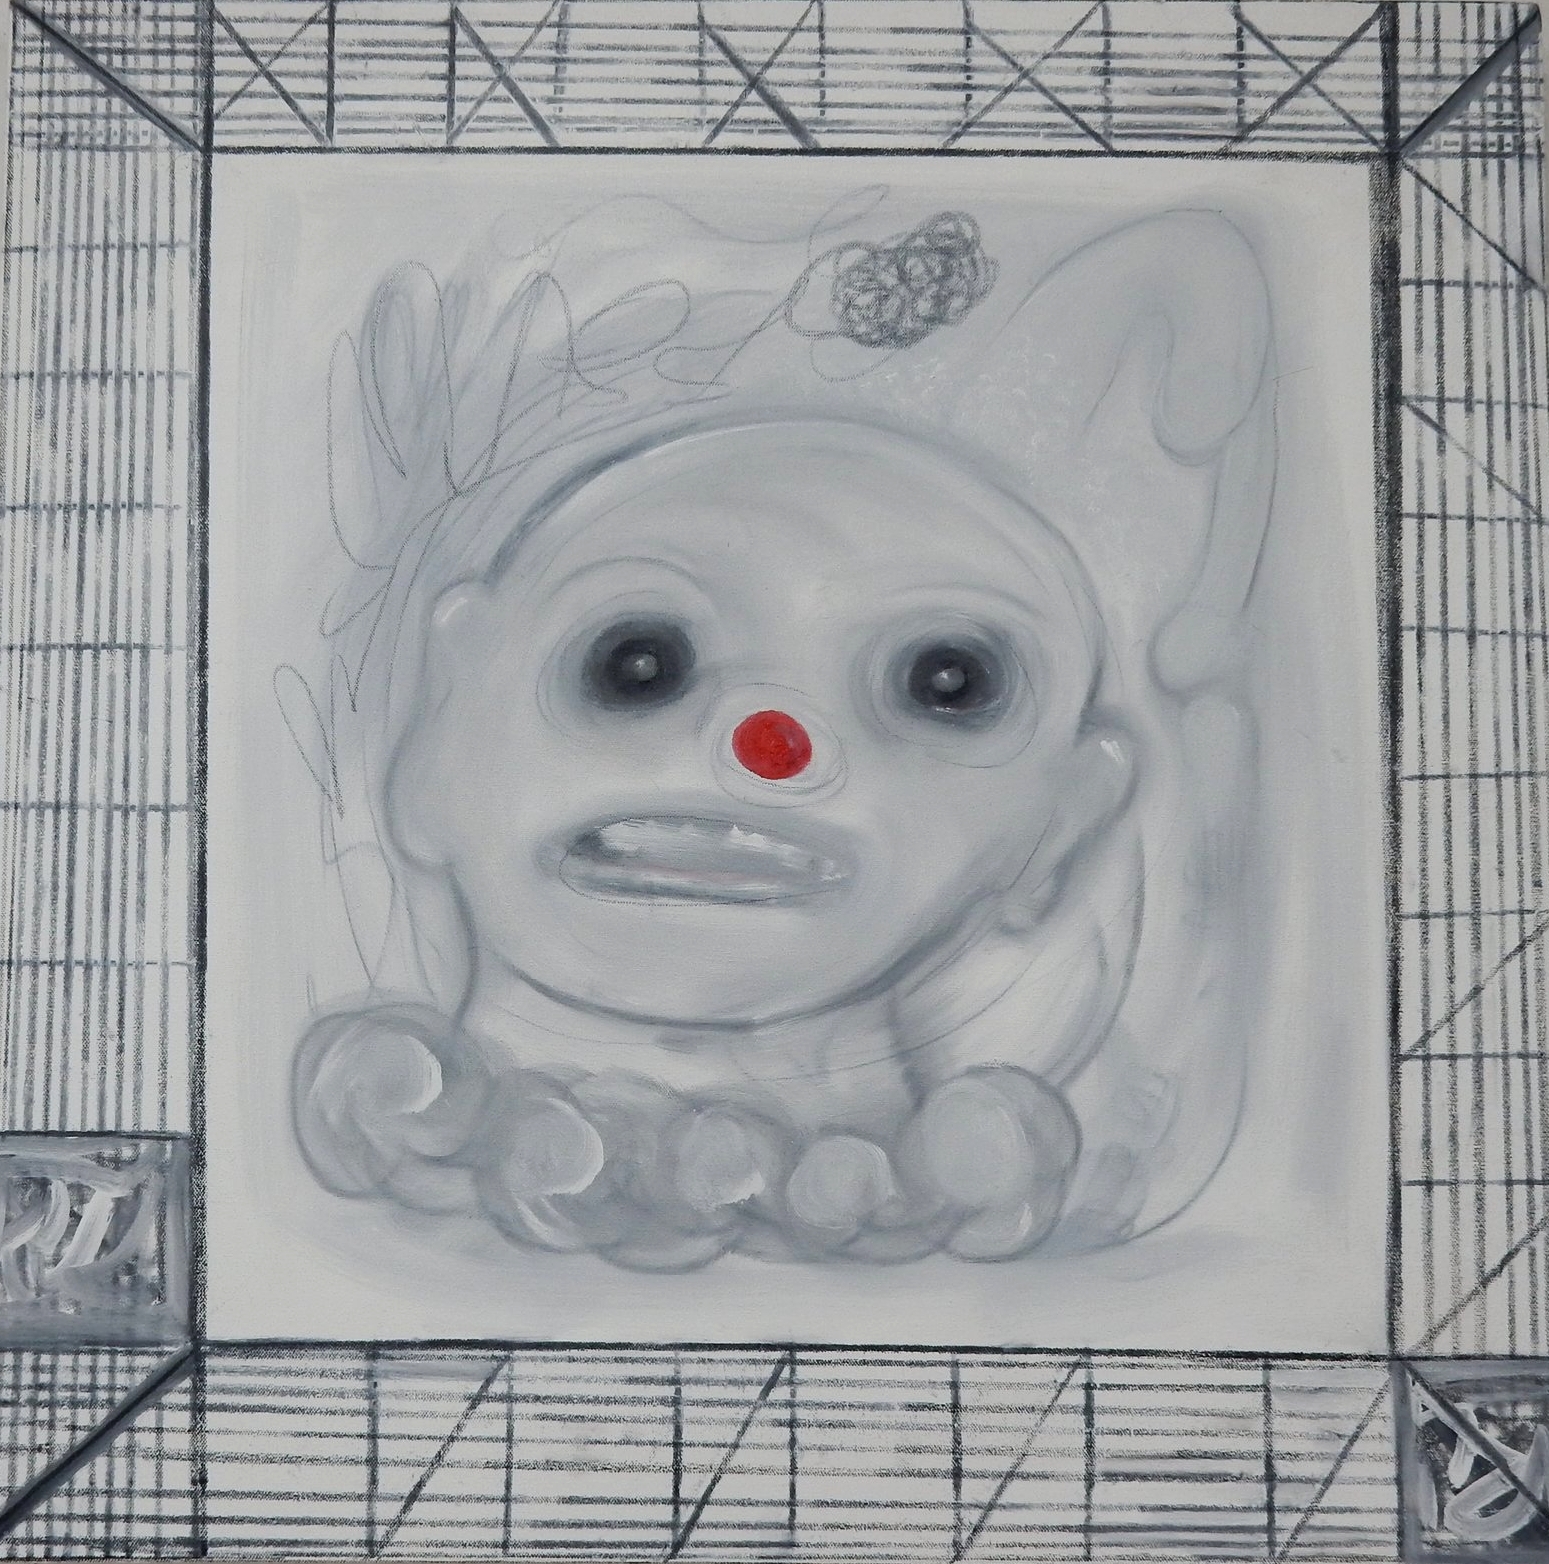 Clown oil and graphite on canvas 30"x30" 2018